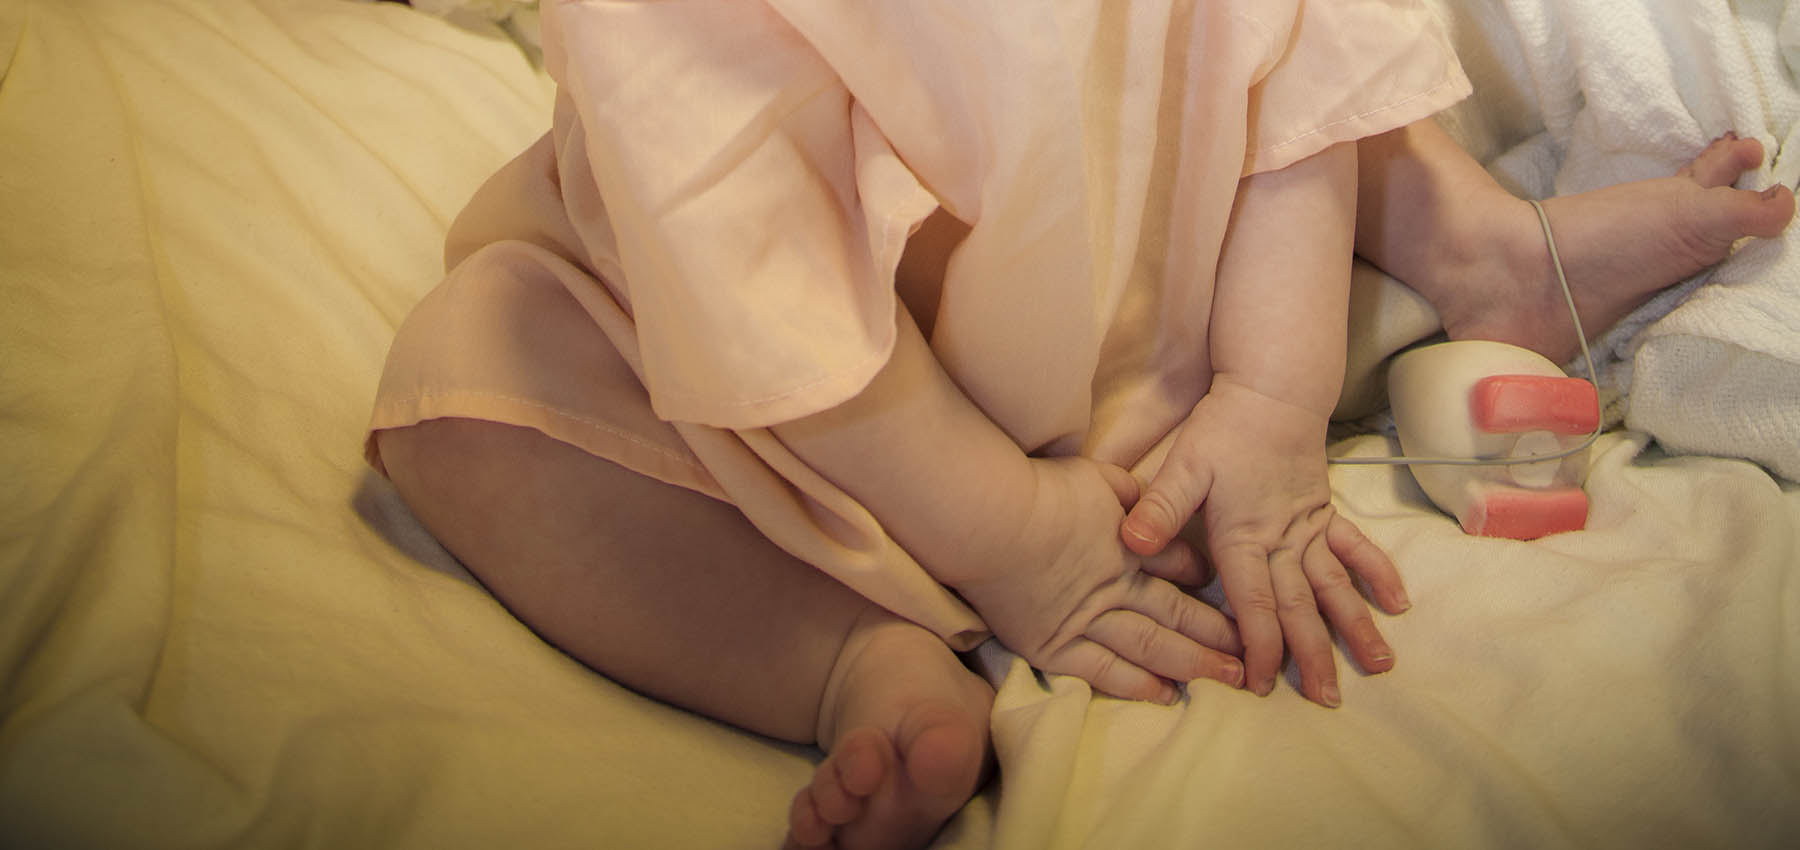 A baby on its hands and feet